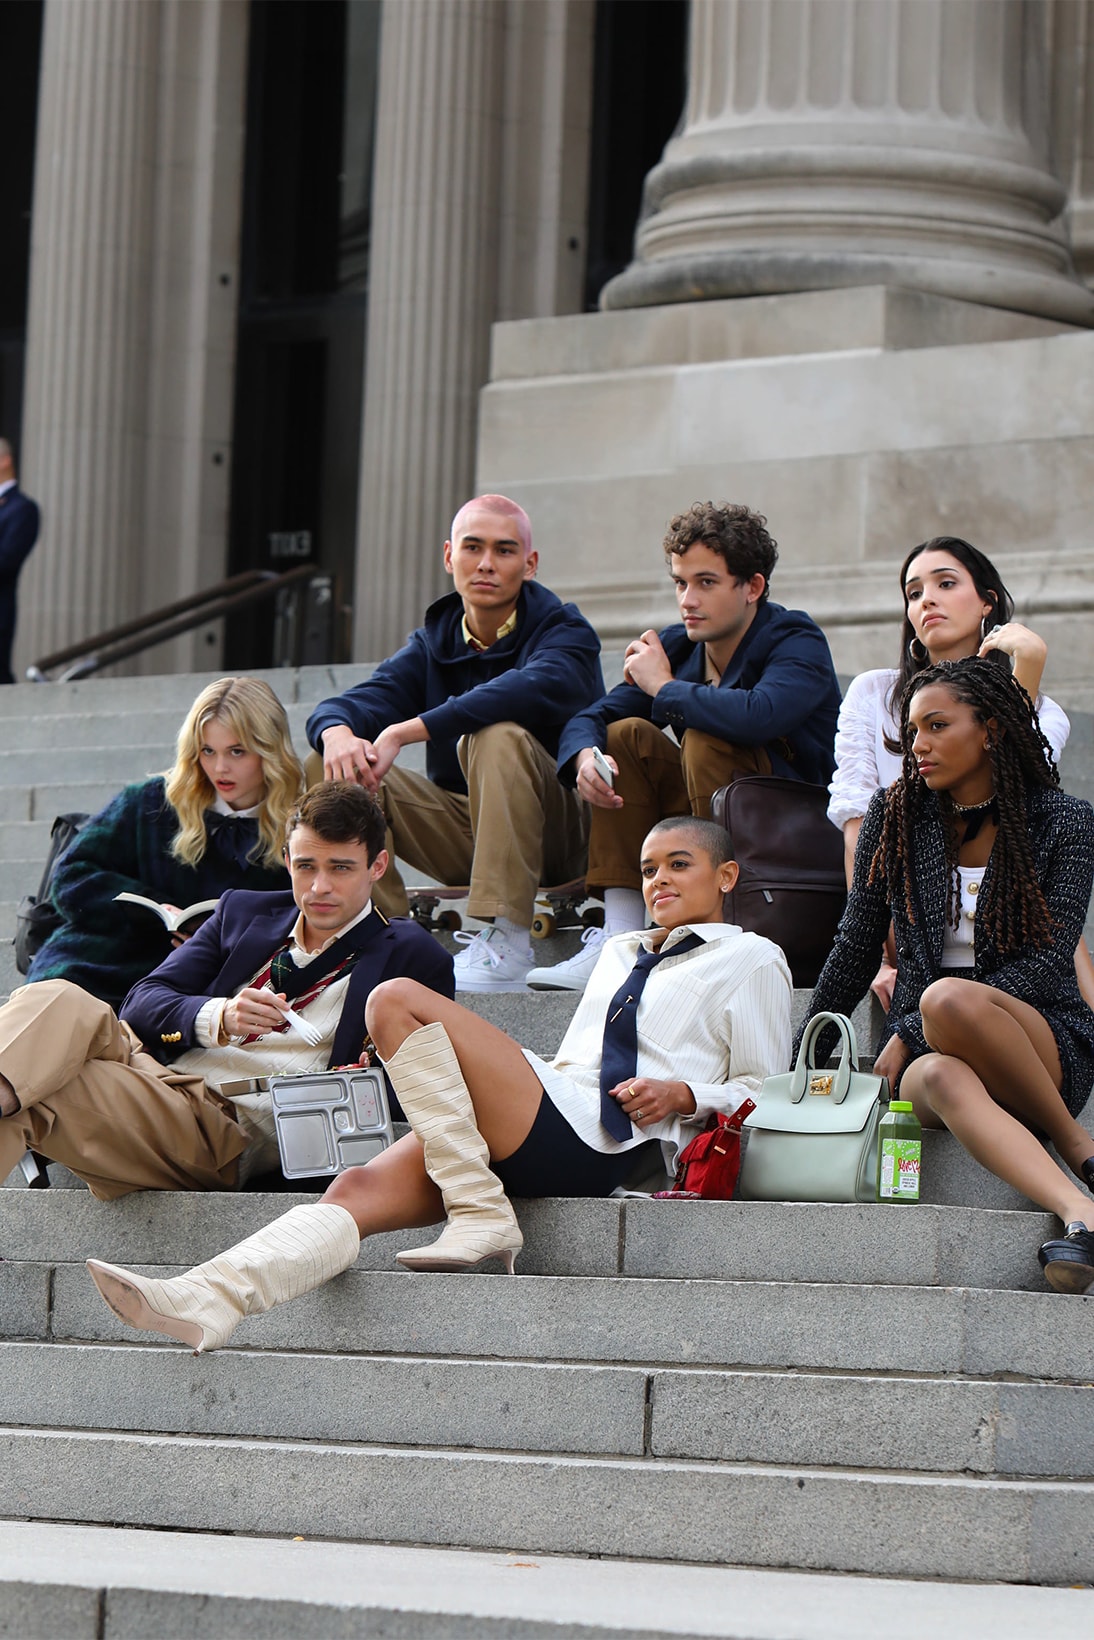 Does the Original 'Gossip Girl' Cast Show up in the HBO Max Reboot?